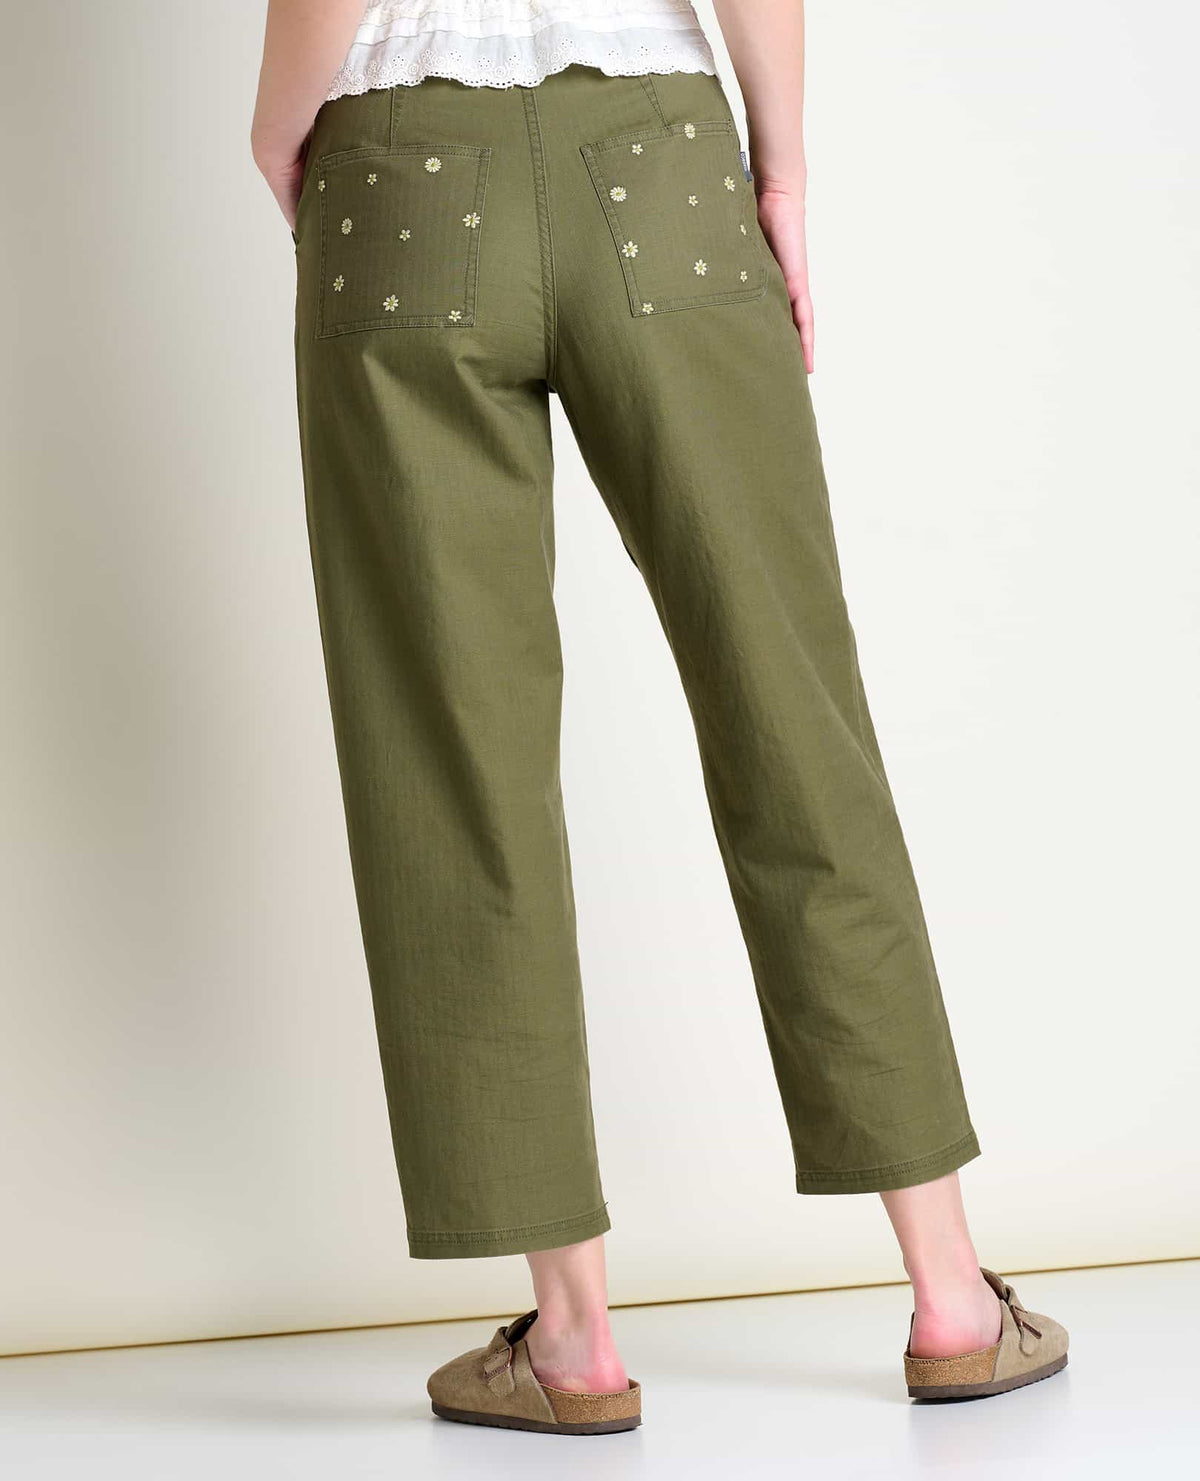 Juniper Utility Pant (Olive Flower Embroidery)